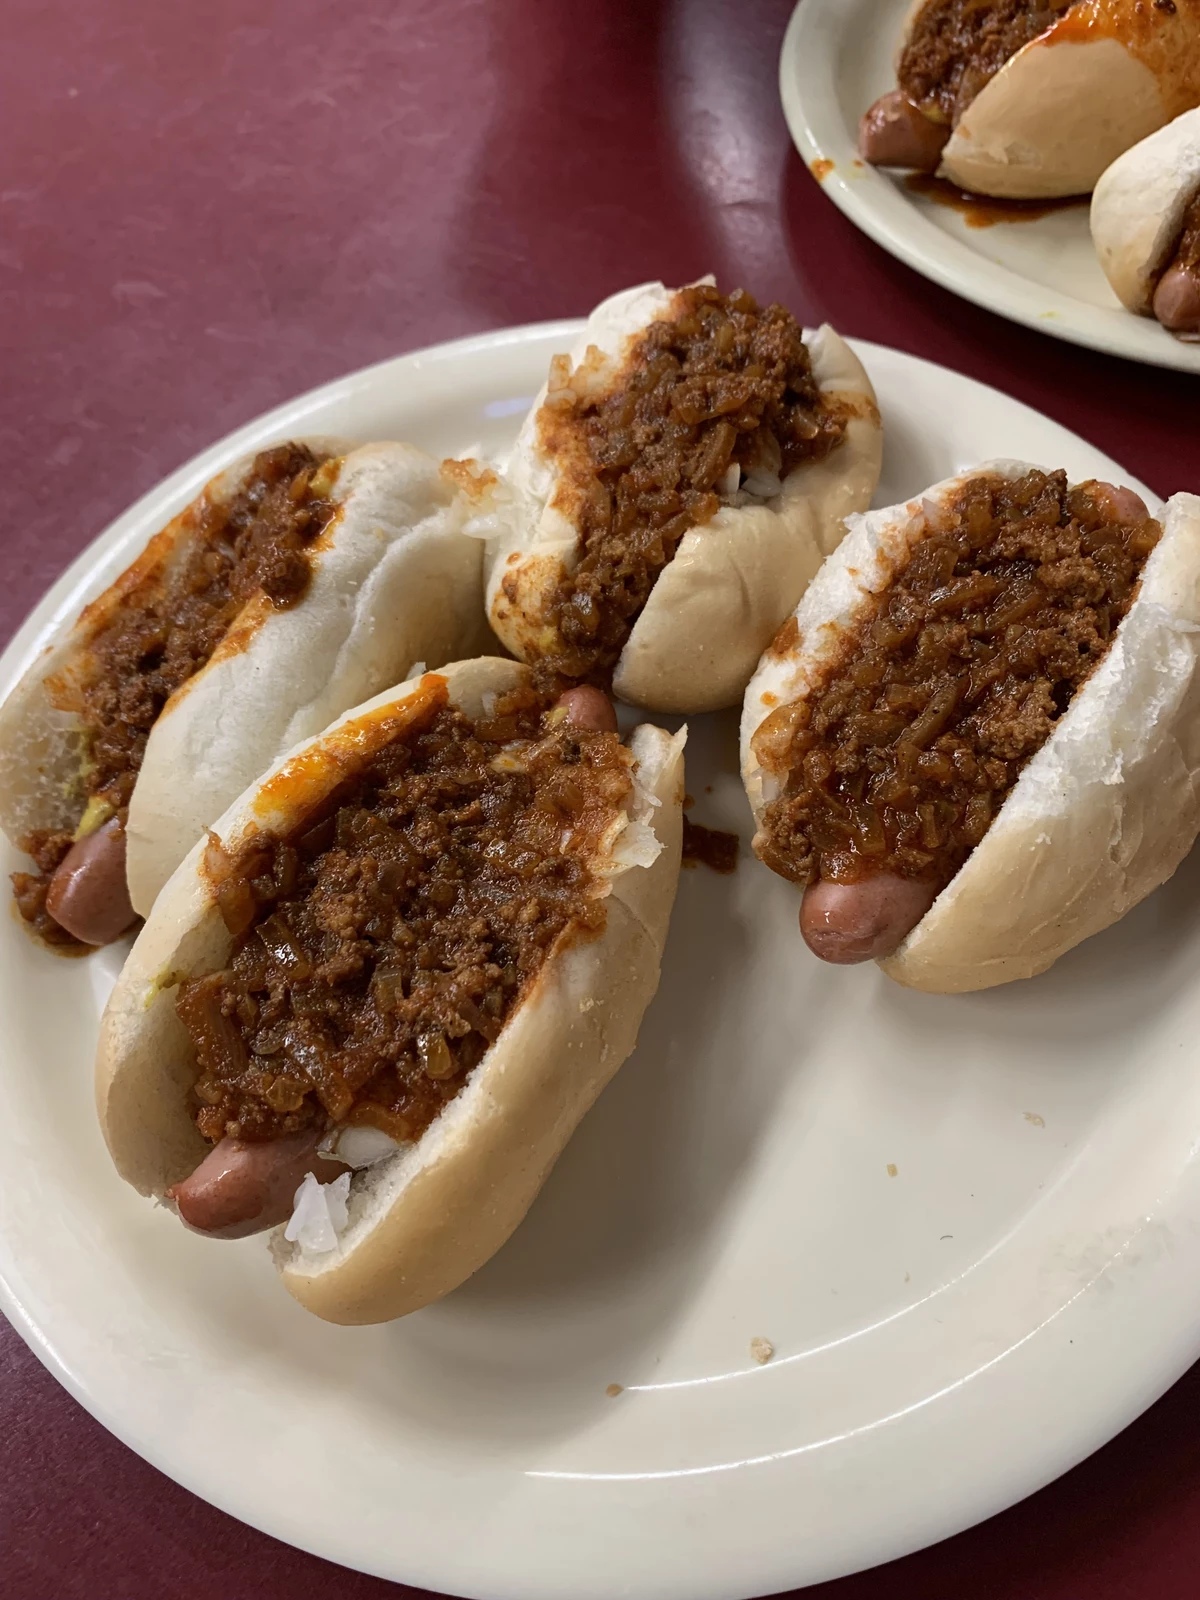 The Capital Region's 10 Best Hot Dogs [RANKED]